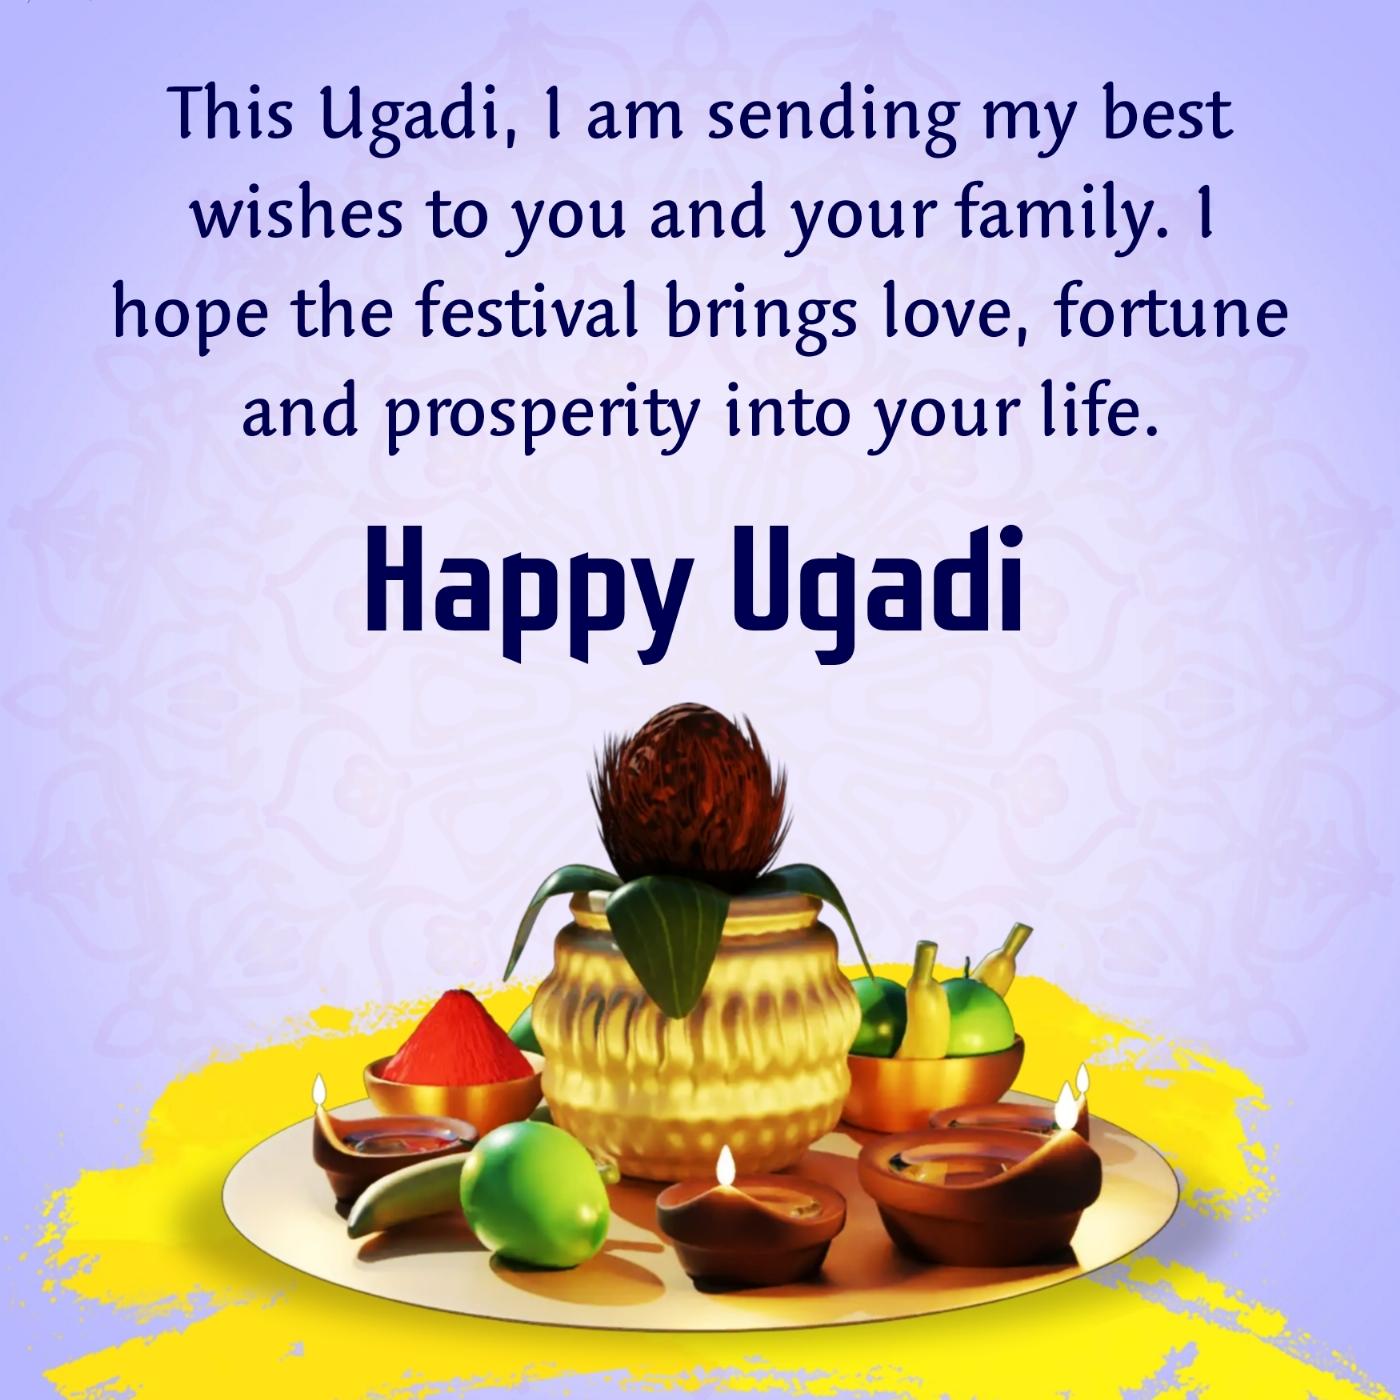 This Ugadi I am sending my best wishes to you and your family